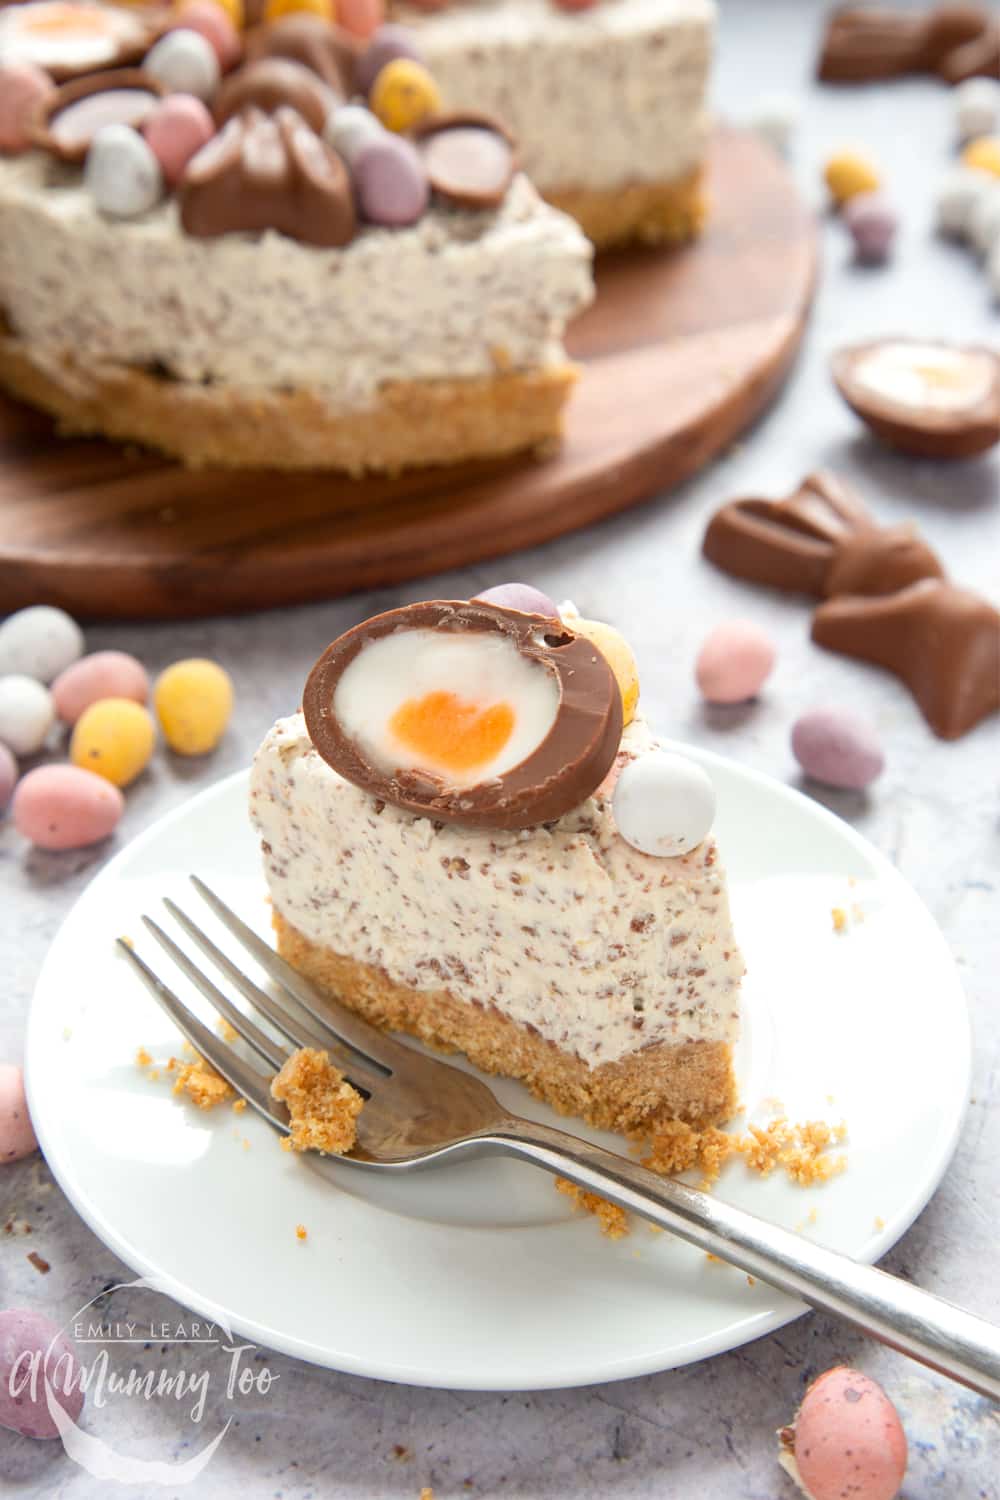 A slice of no-bake Easter cheesecake on a white plate with a fork beside it. The cheesecake is topped with mini chocolate eggs and half a creme egg. More cheesecake is visible in the background. A piece has been taken from the slice and crumbs site around and on the fork.